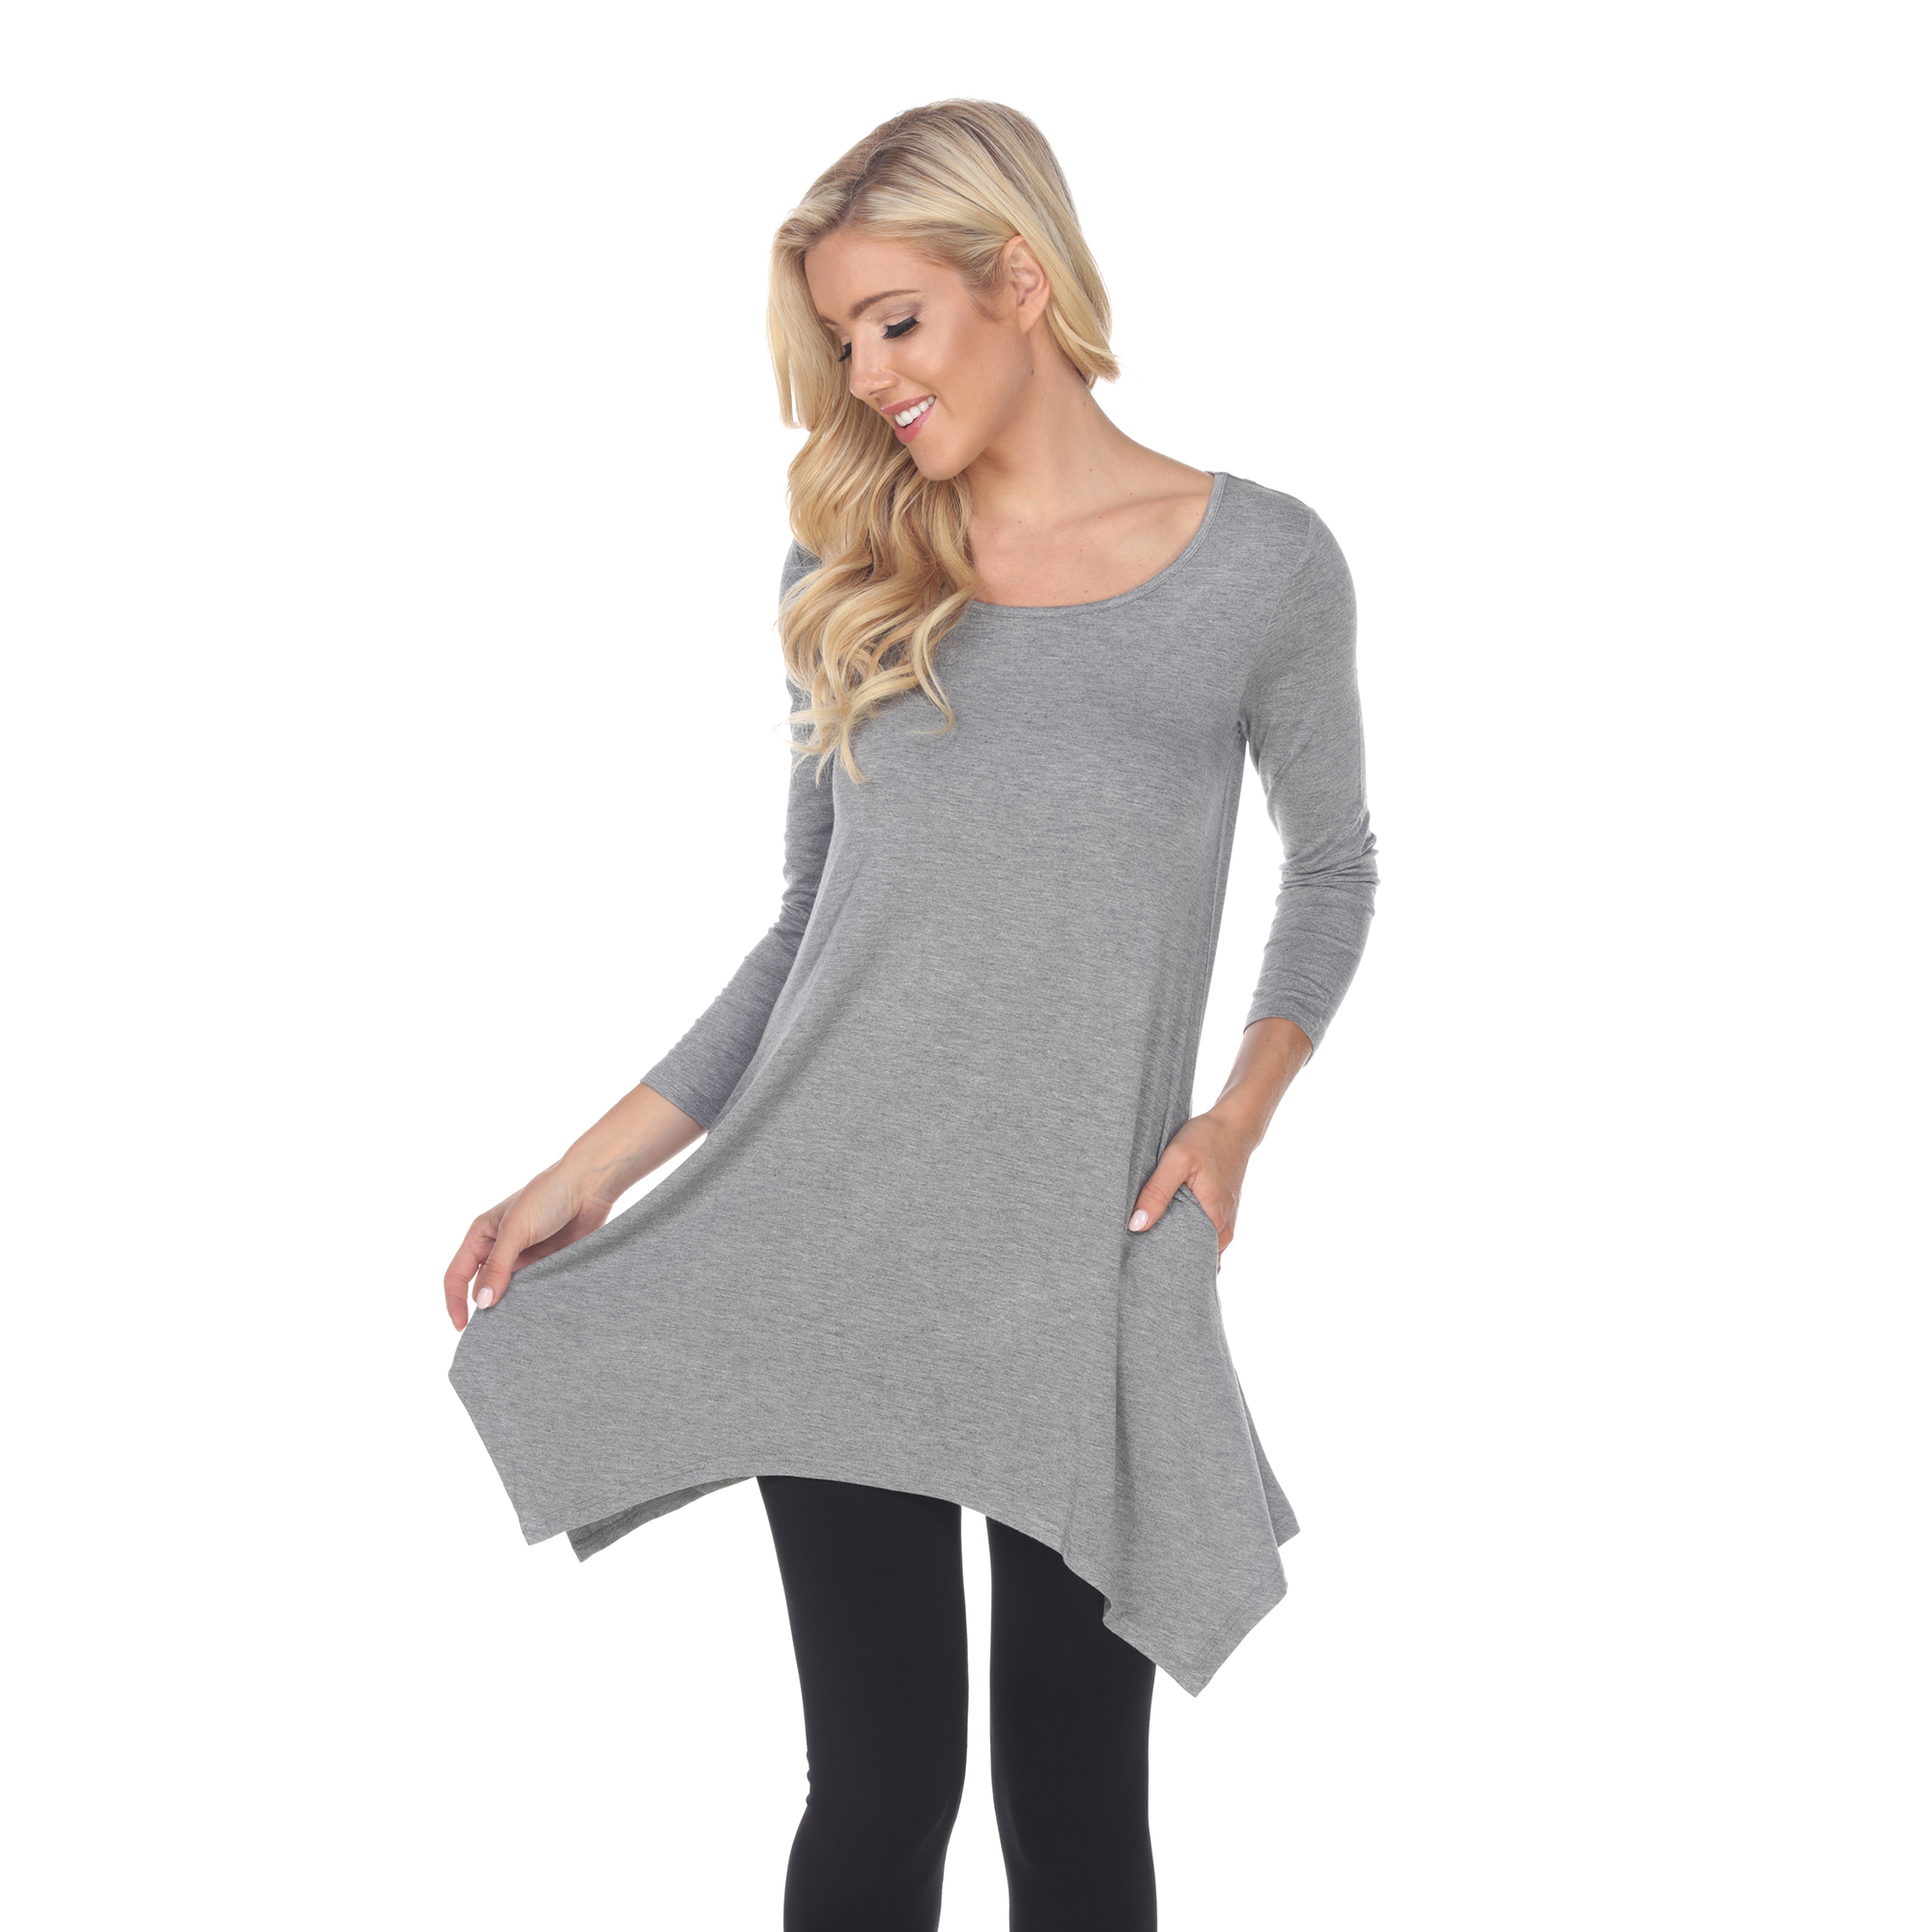 White Mark Women's Quarter Sleeve Tunic Top With Pockets - Charcoal, Medium